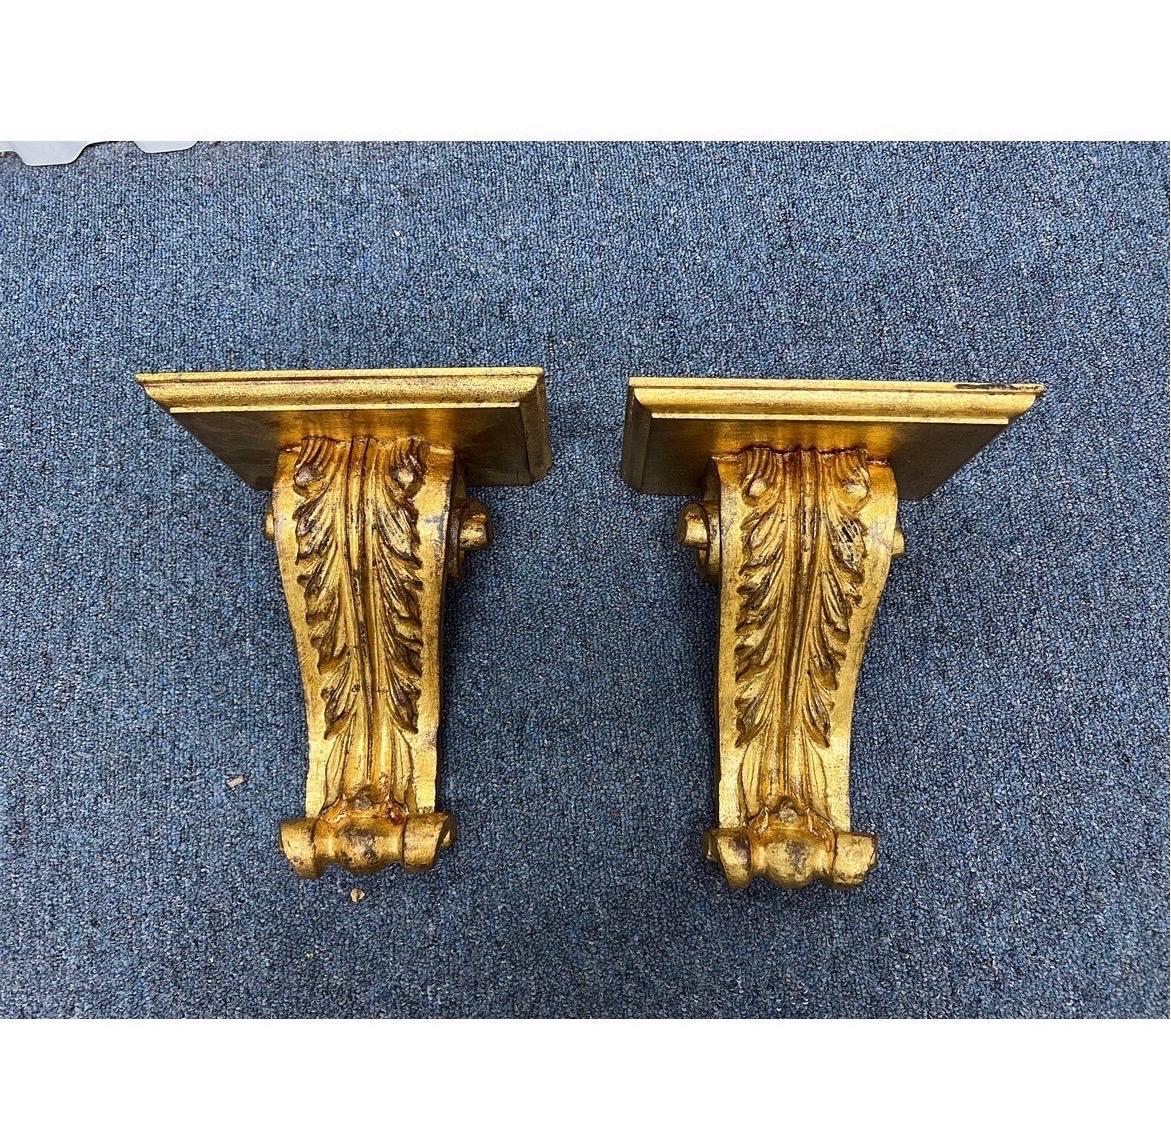 A fine pair of giltwood Italian brackets with acanthus leaf scrolls. Marked to verso 